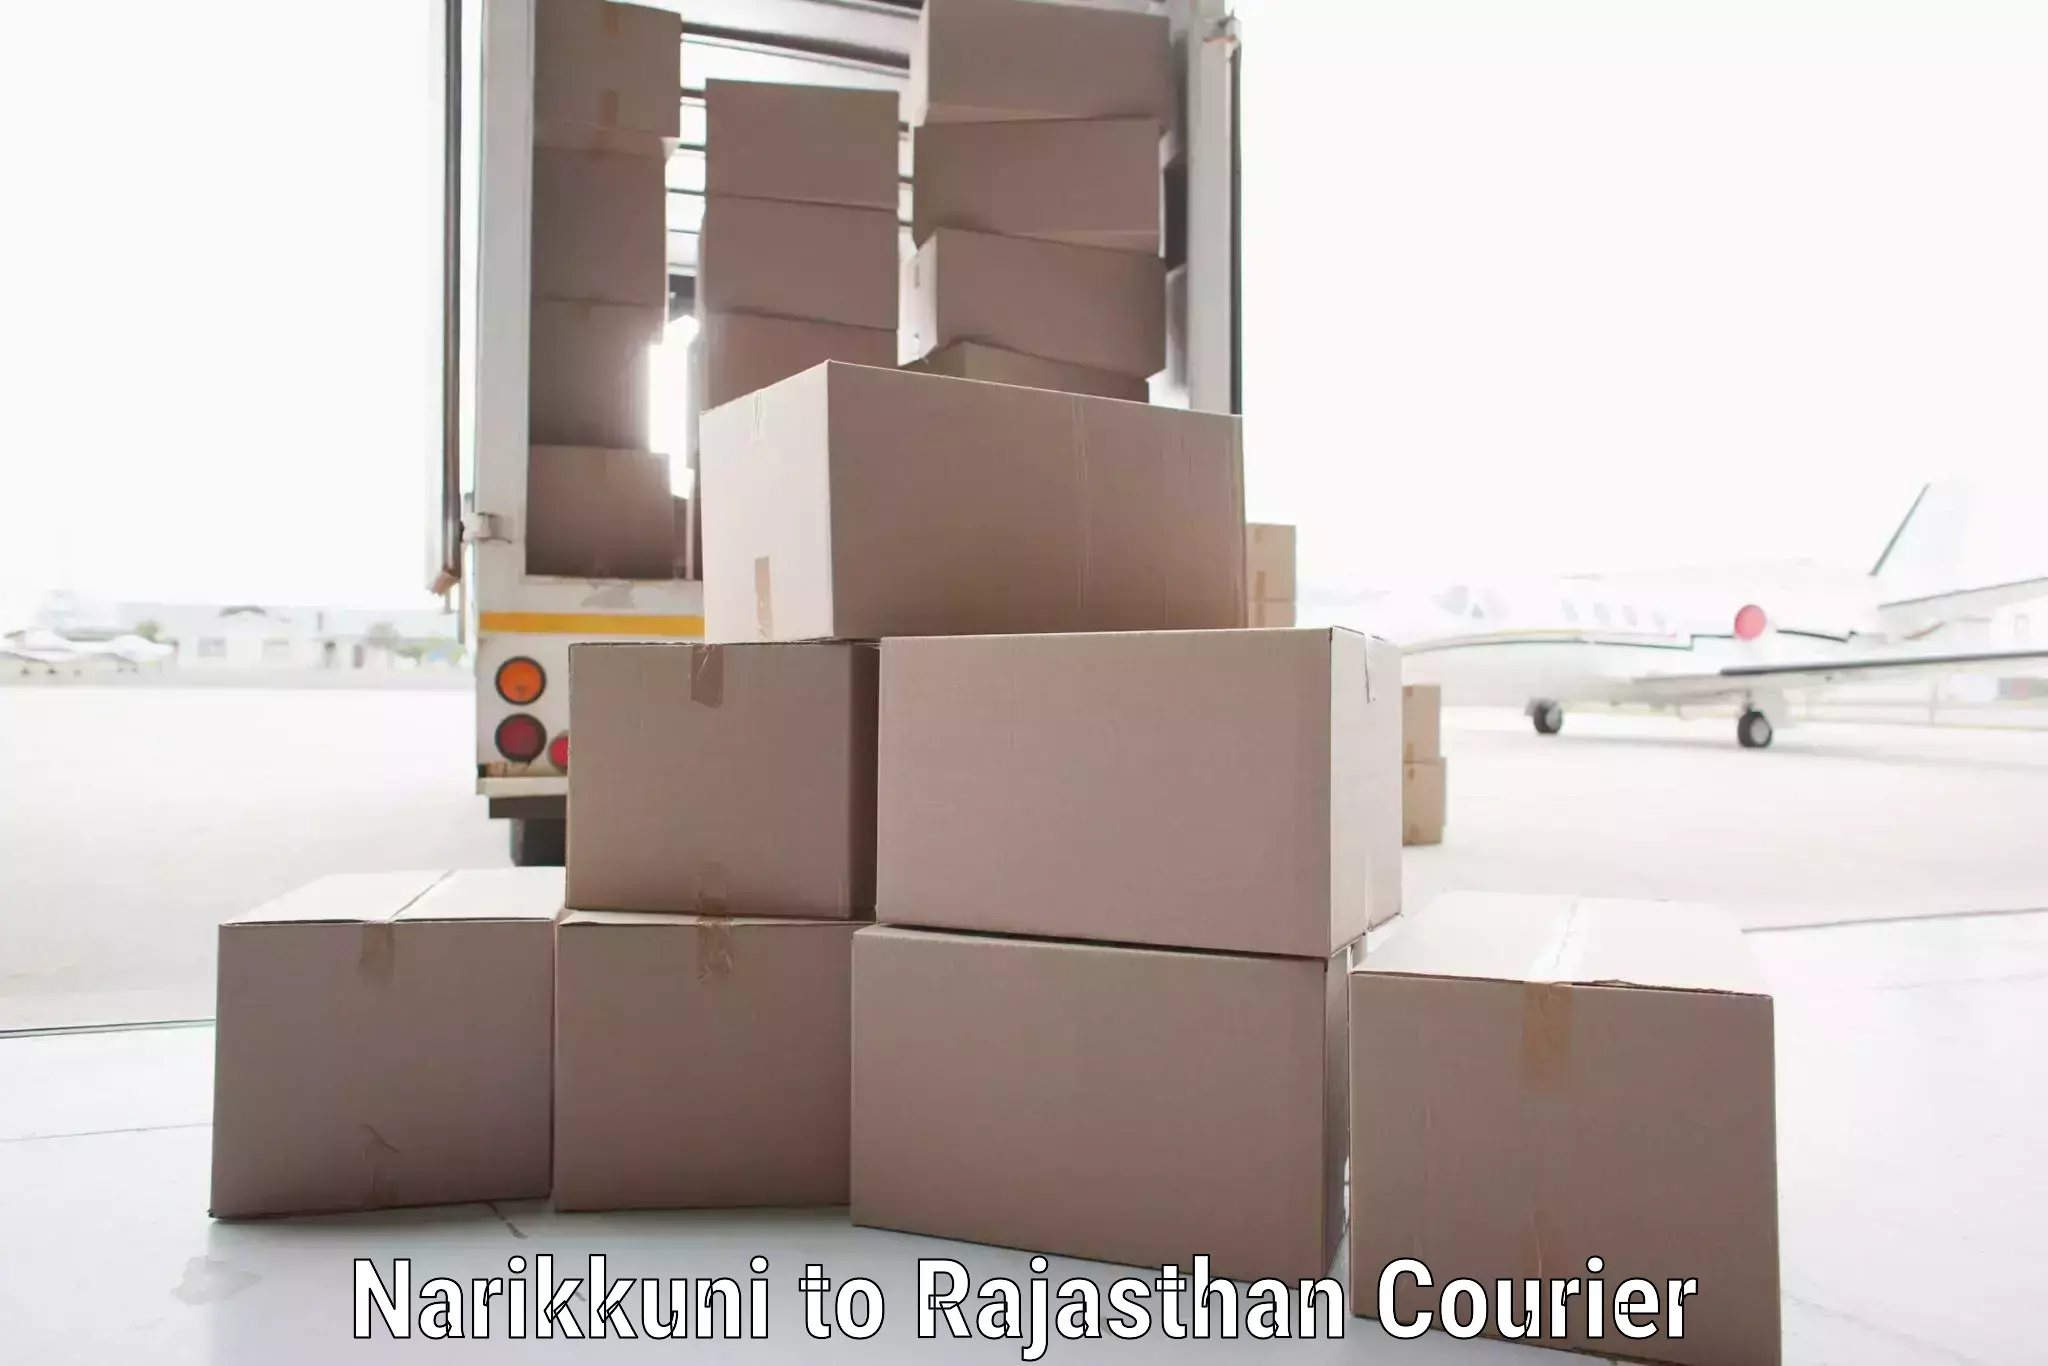 High-capacity courier solutions Narikkuni to Abu Road